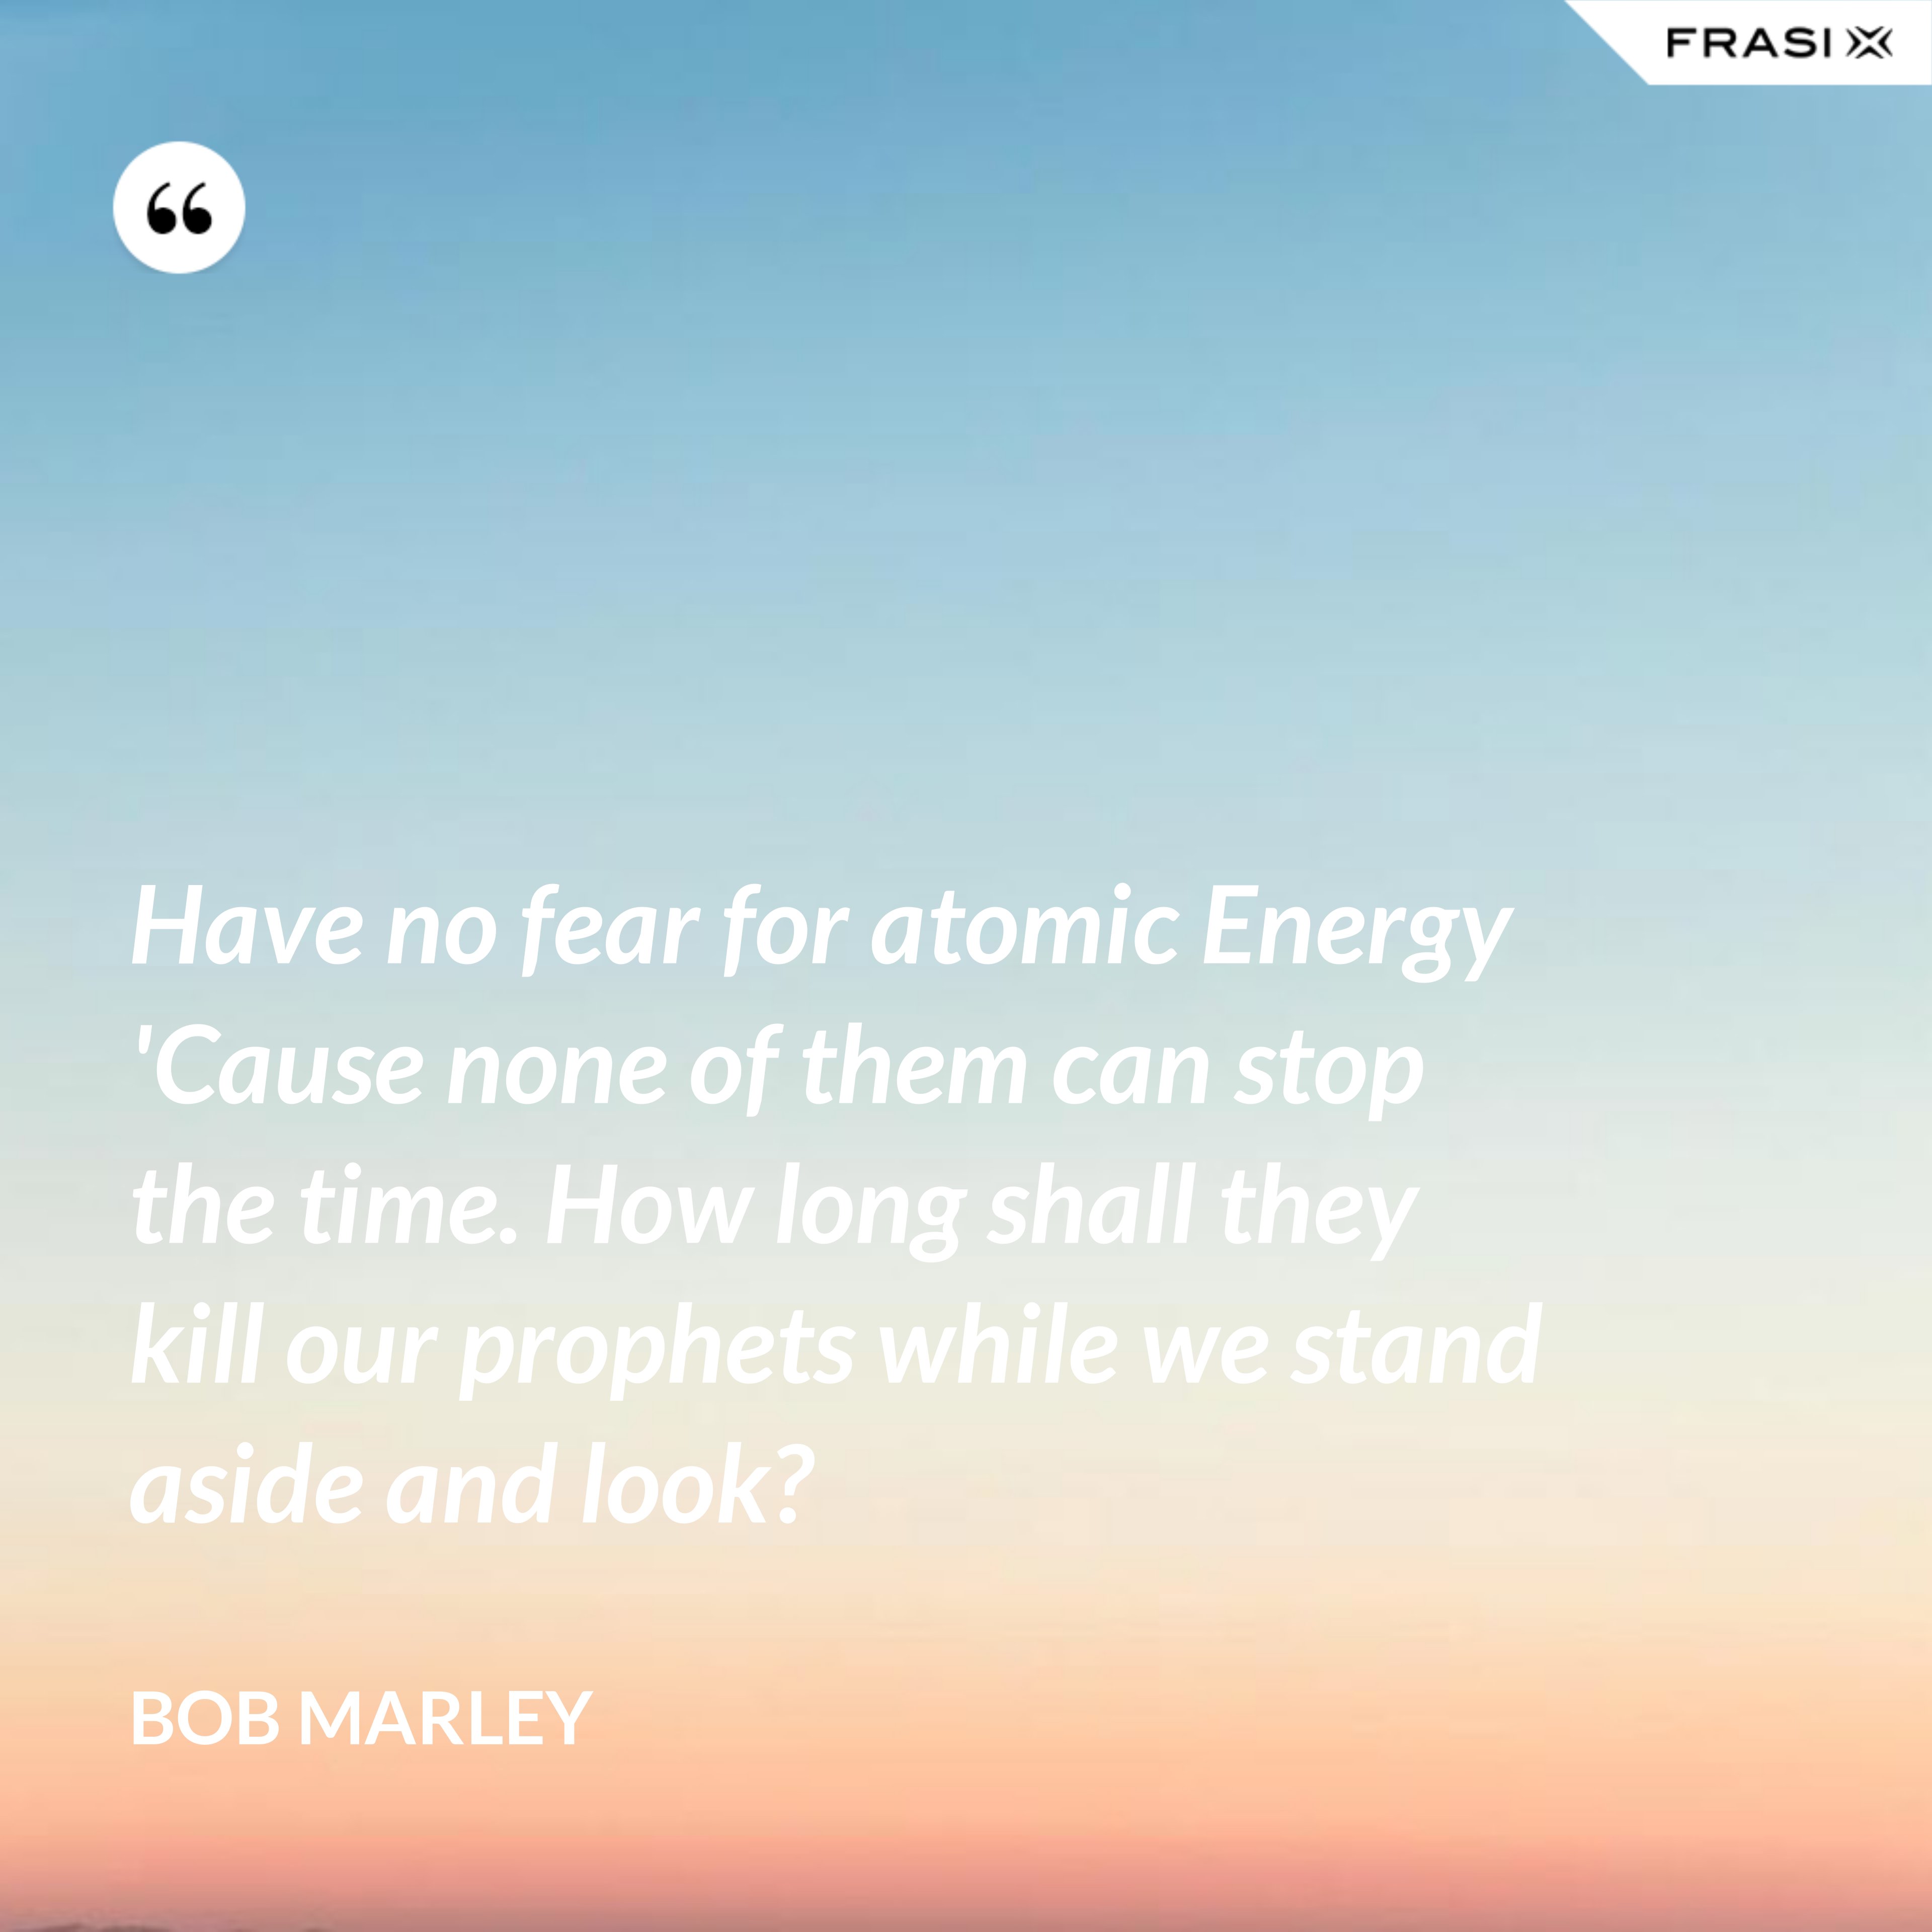 Have no fear for atomic Energy 'Cause none of them can stop the time. How long shall they kill our prophets while we stand aside and look? - Bob Marley